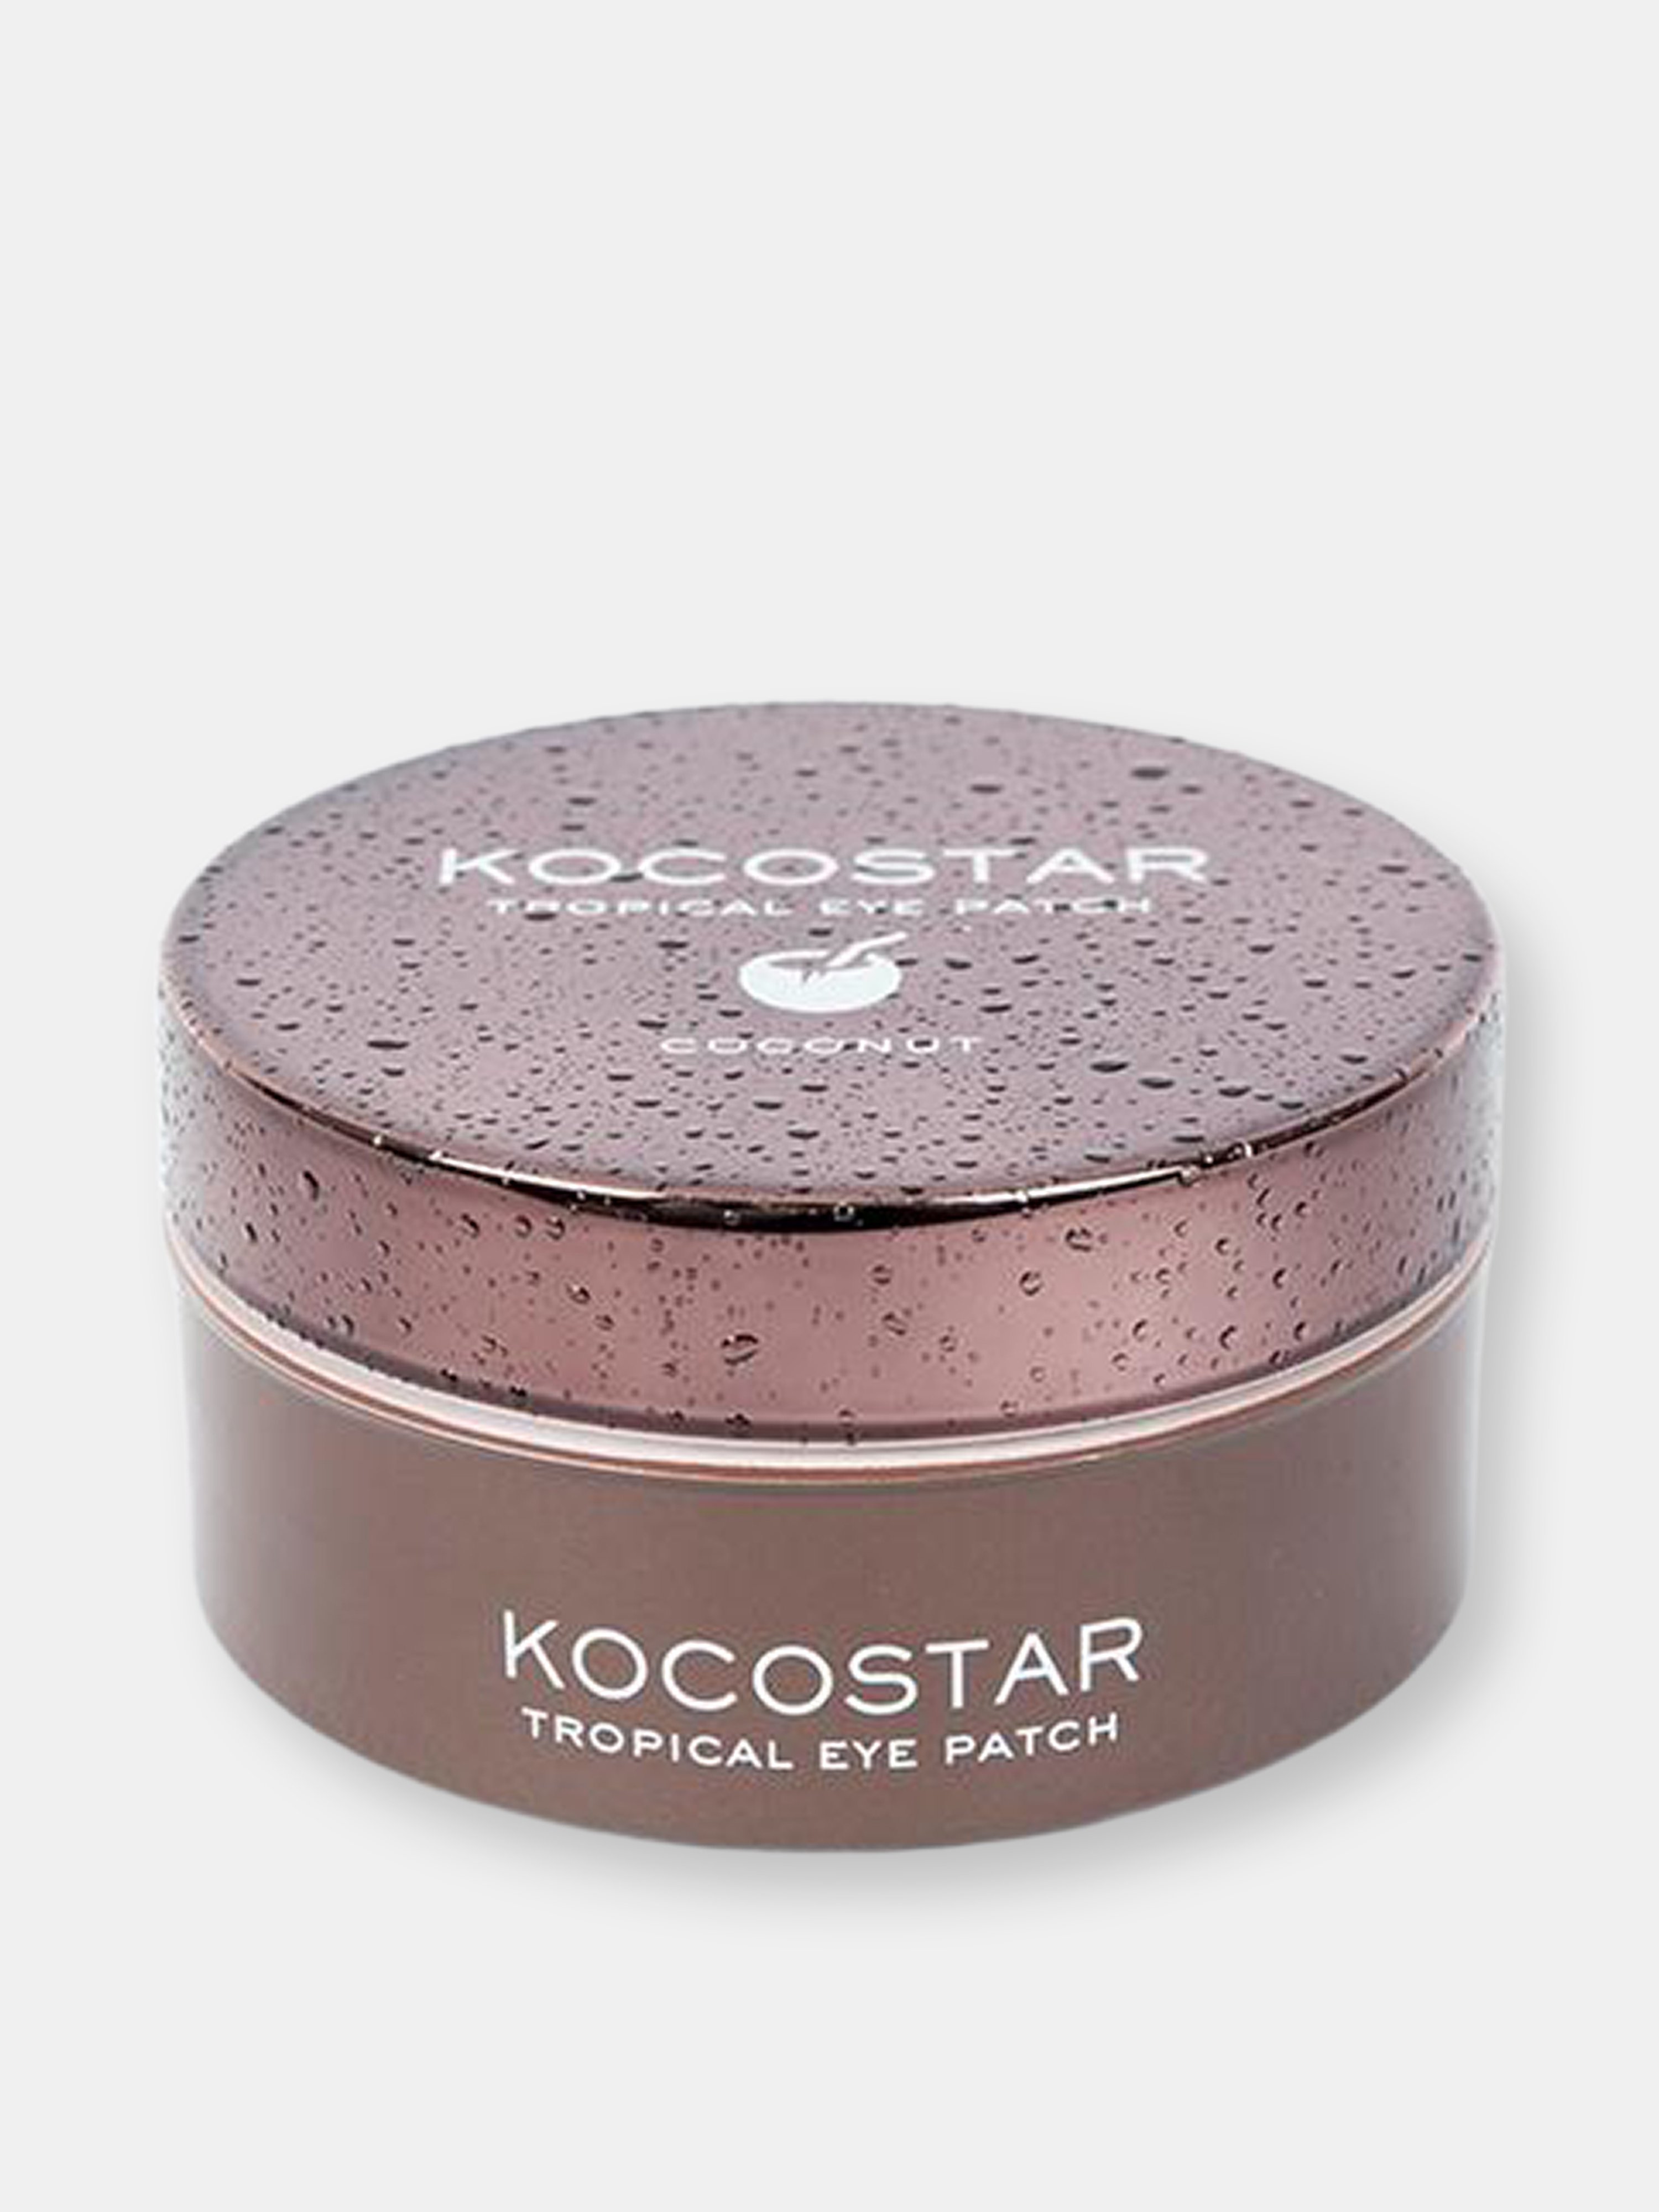 Kocostar Tropical Eye Patch Coconut Unscented 30 Pairs